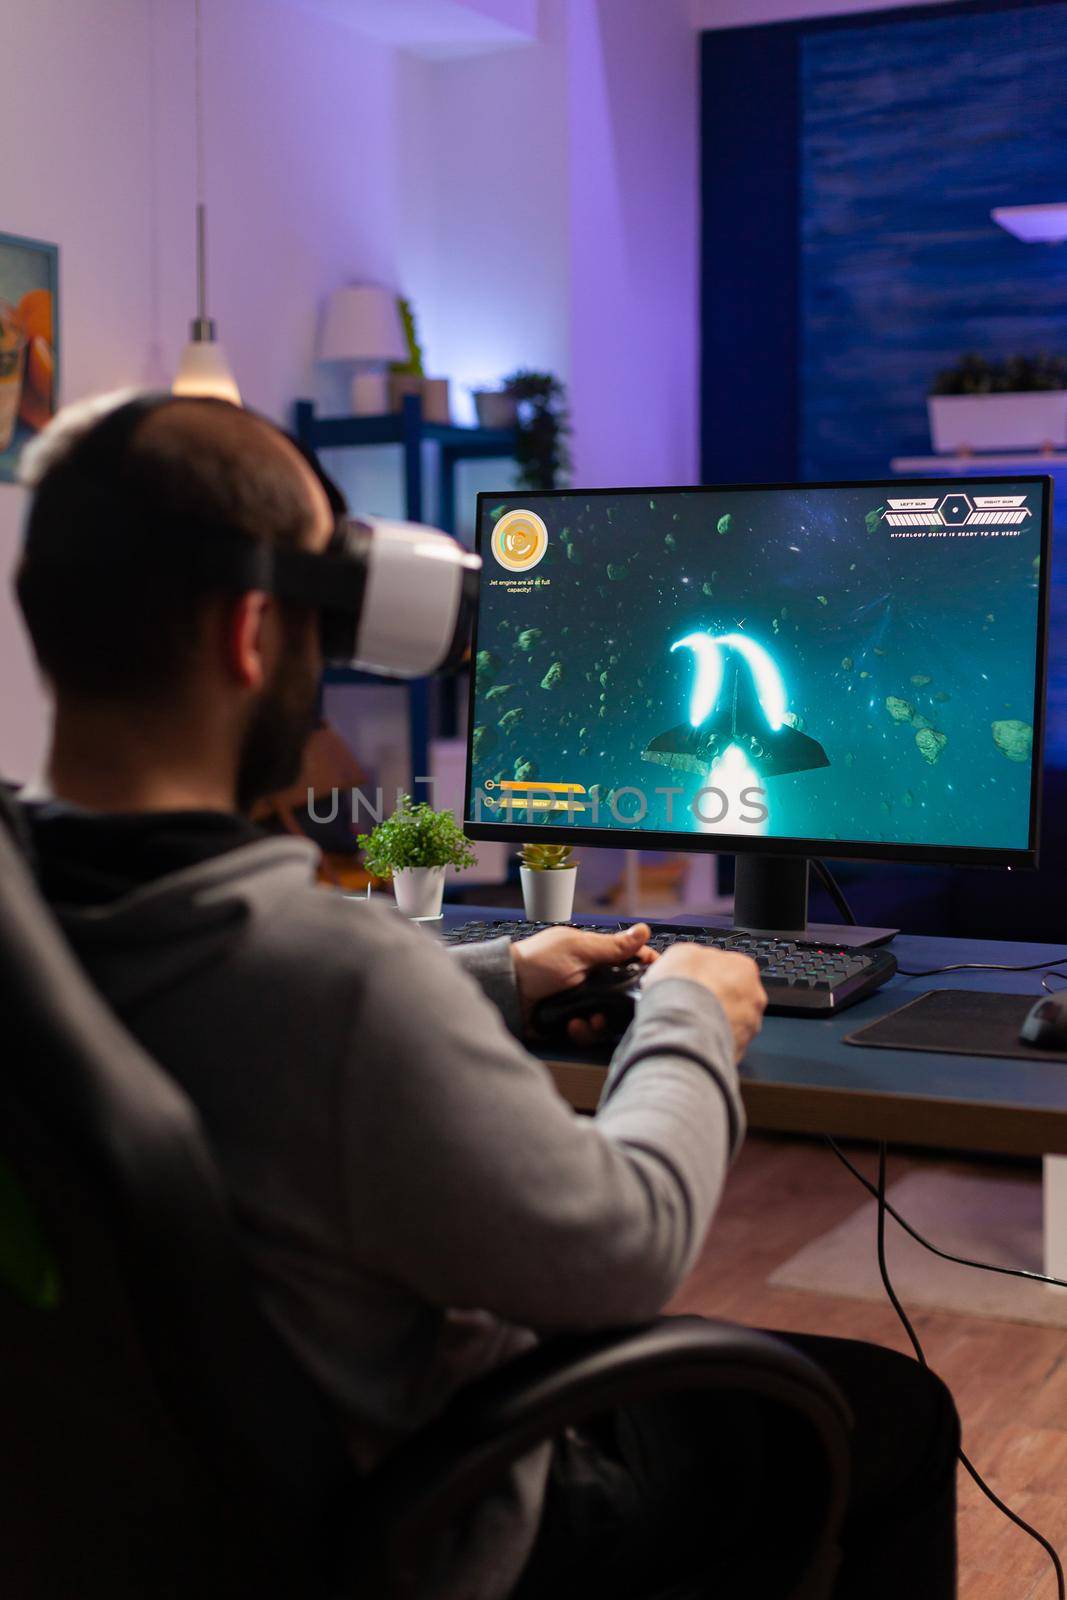 Player man playing video game at powerful computer late night wearing vr headset. Excited player using wireless controller for virtual tournament gaming space shooter at home